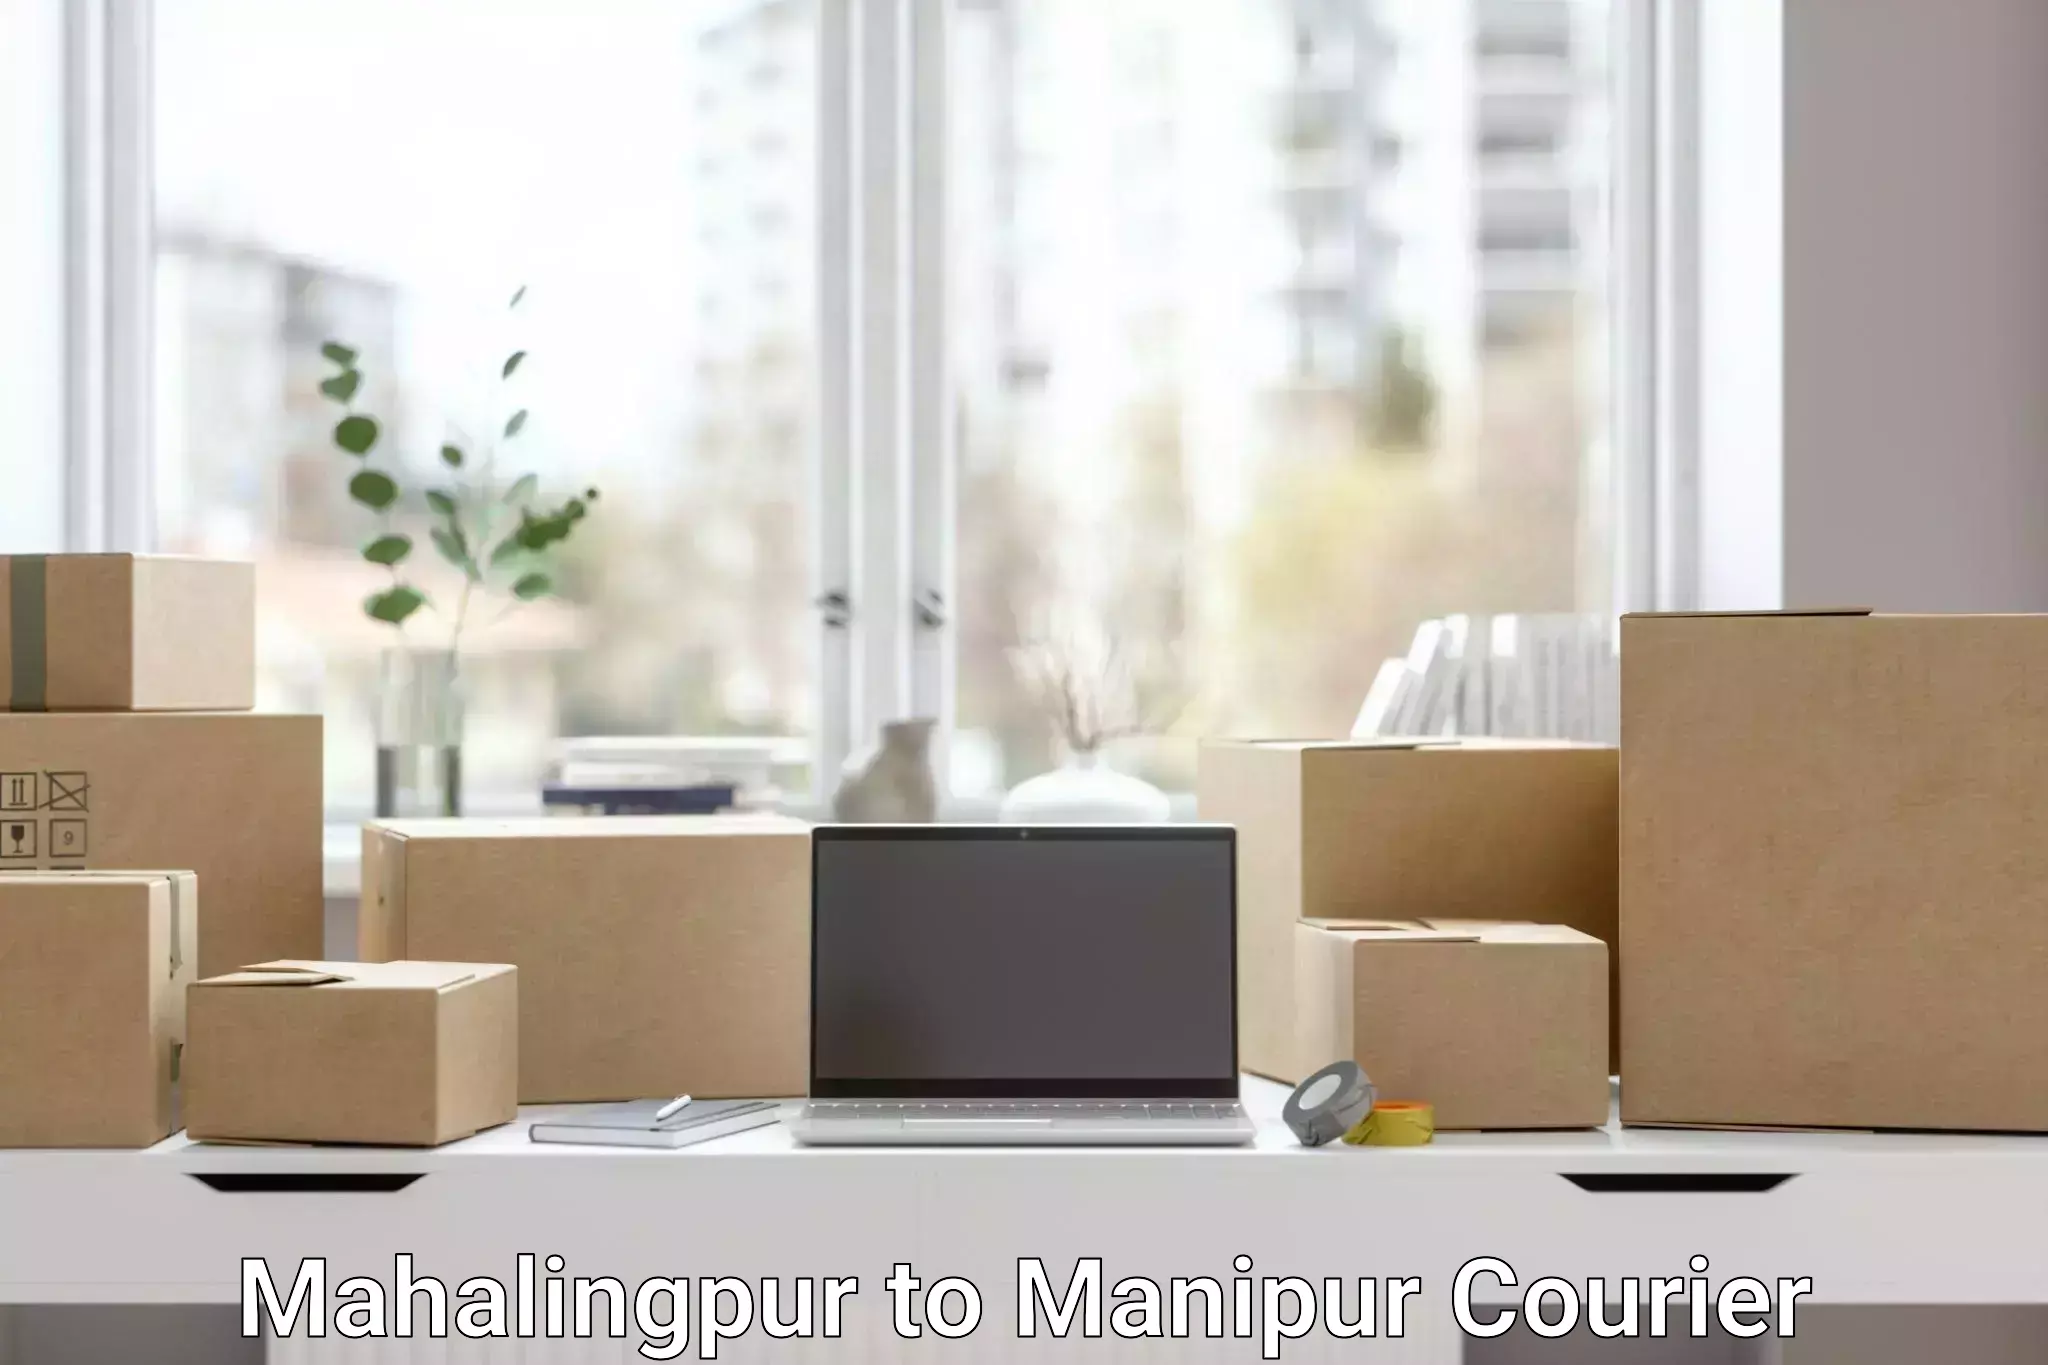 Efficient courier operations Mahalingpur to Manipur